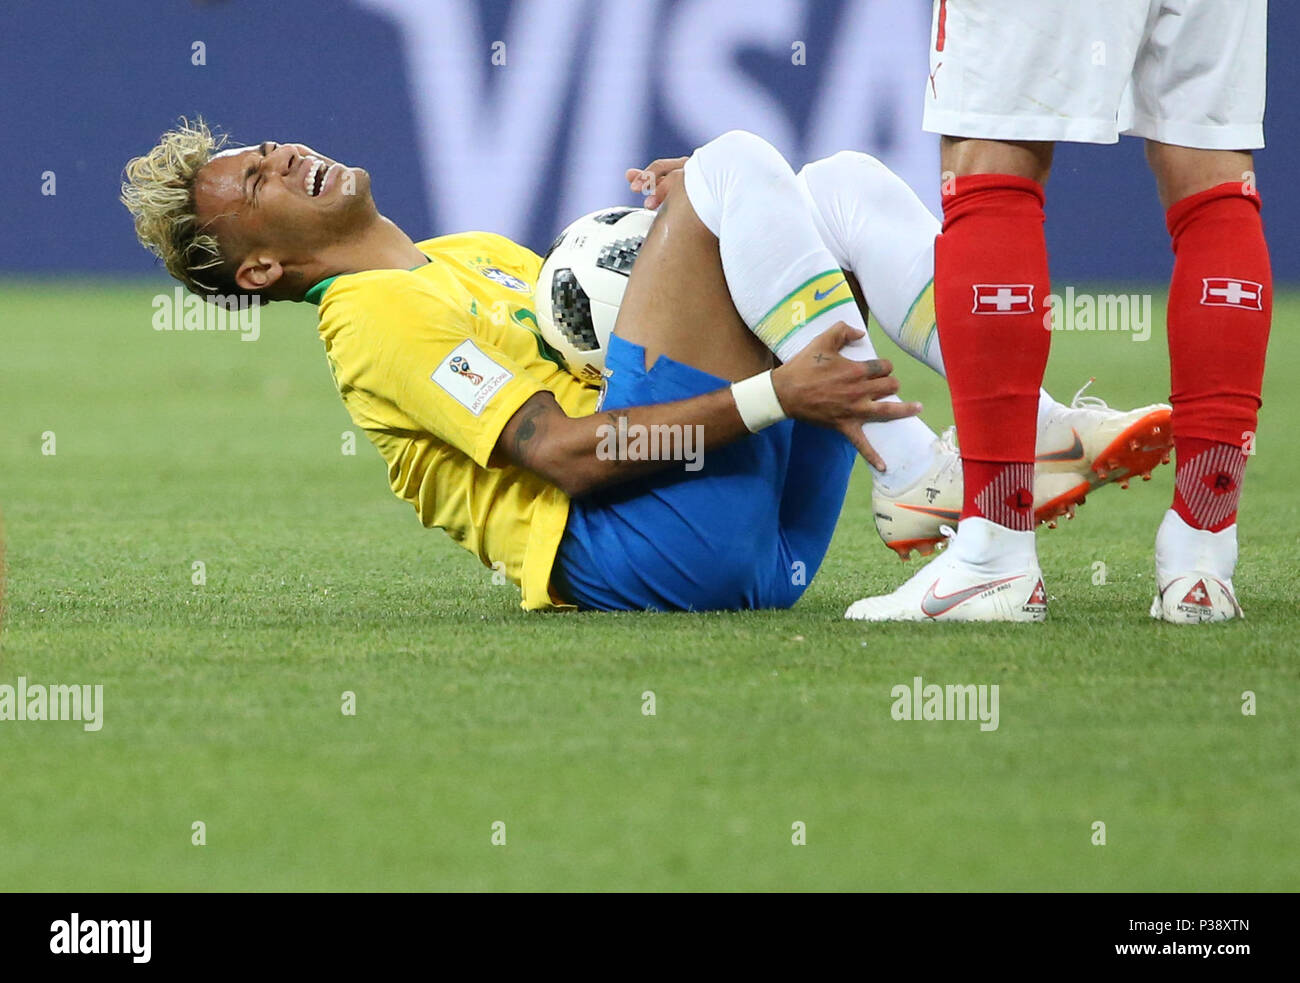 Rostov, Russia, 17th June, 2018. Neymar of Brazil sustains injury during a group E match between Brazil and Switzerland at the 2018 FIFA World Cup in Rostov-on-Don, Russia, June 17, 2018. Credit: Li Ming/Xinhua/Alamy Live News Stock Photo